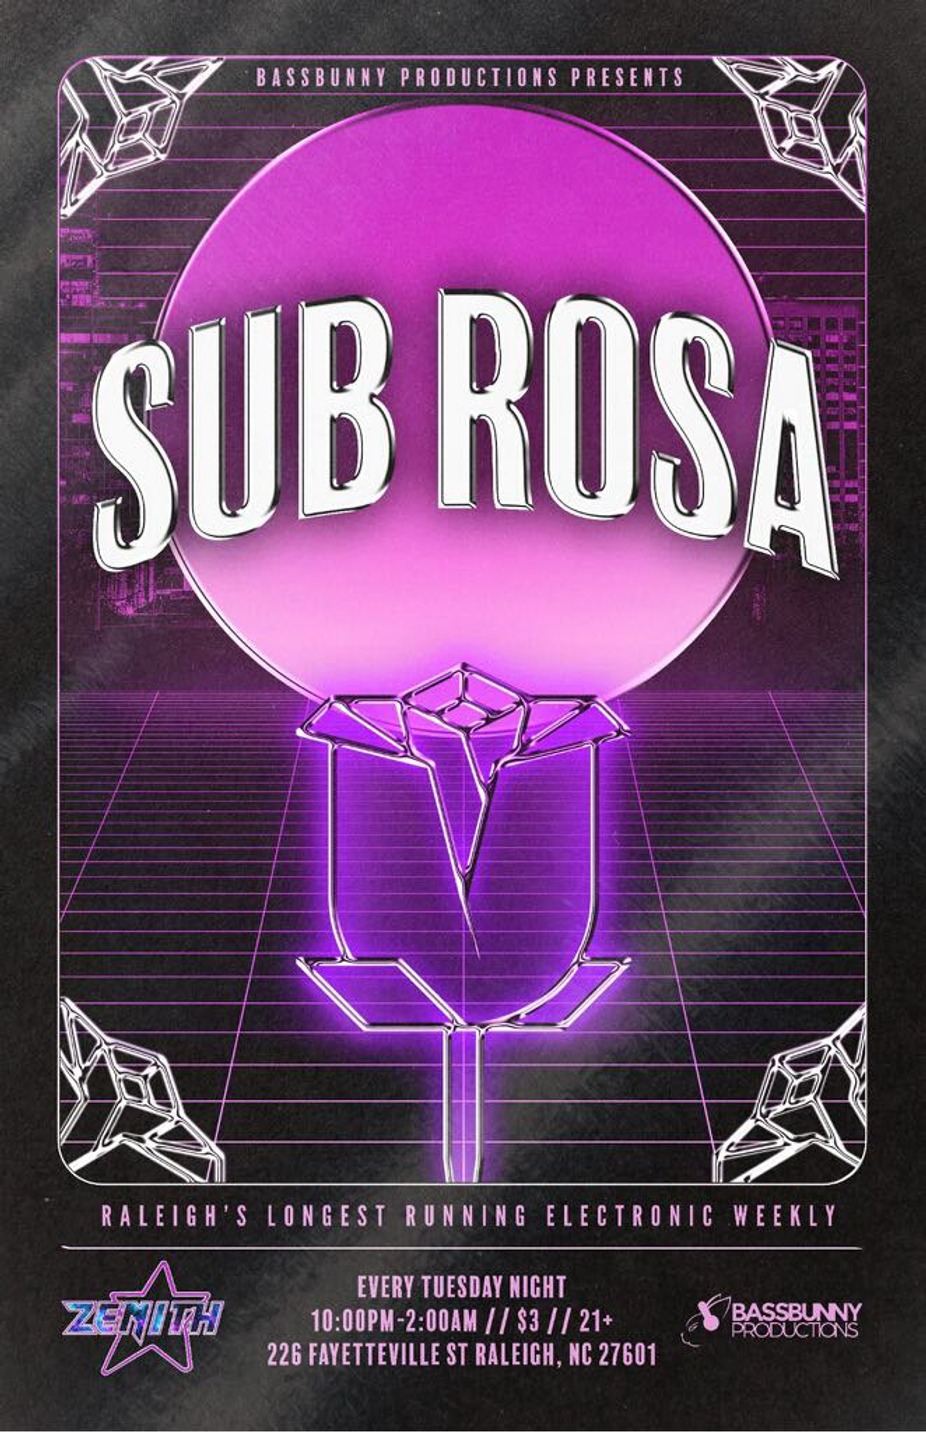 Zenith presents: Sub Rosa by Bassbunny Productions event photo